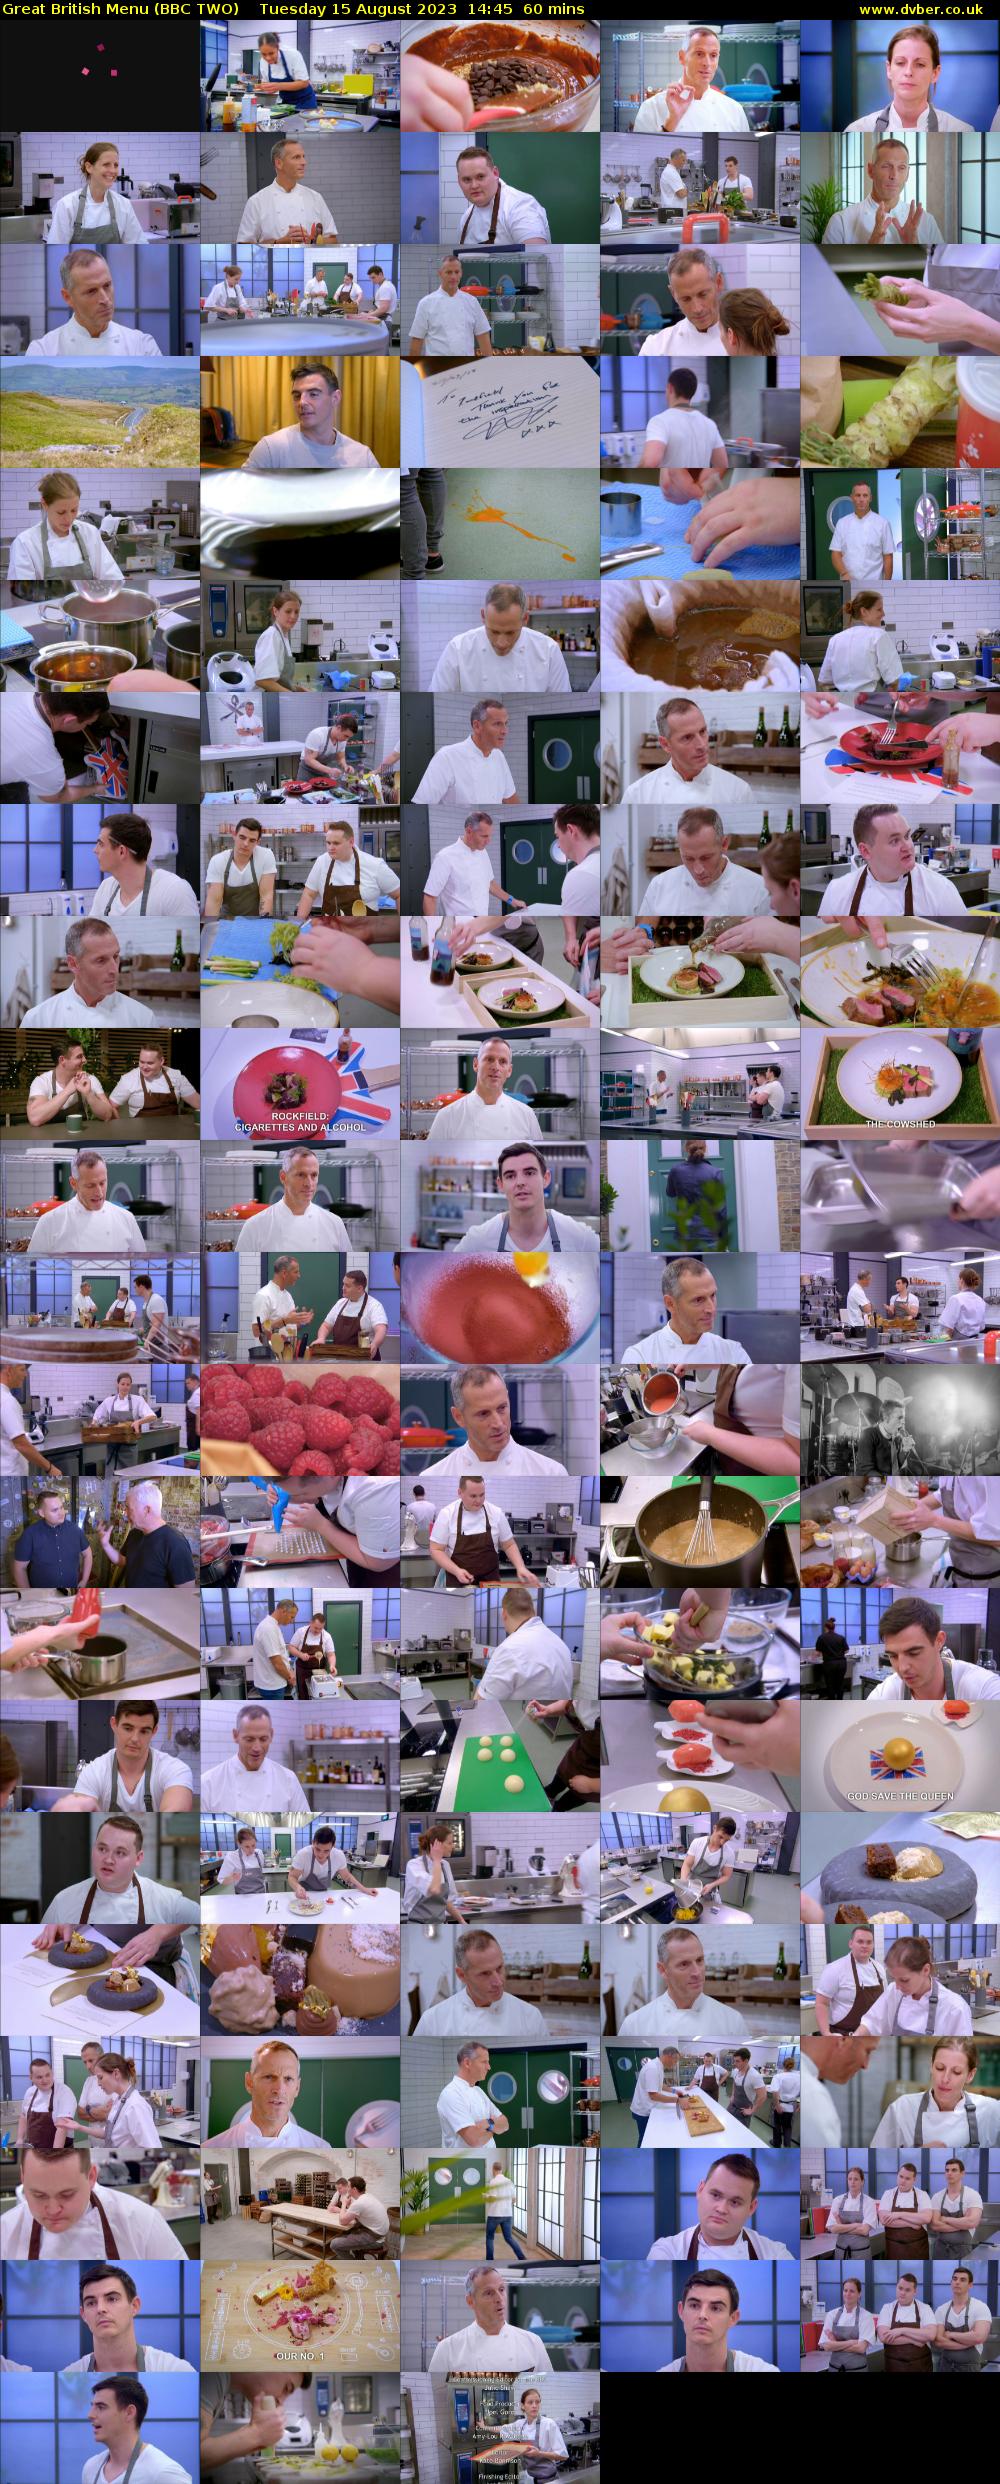 Great British Menu (BBC TWO) Tuesday 15 August 2023 14:45 - 15:45